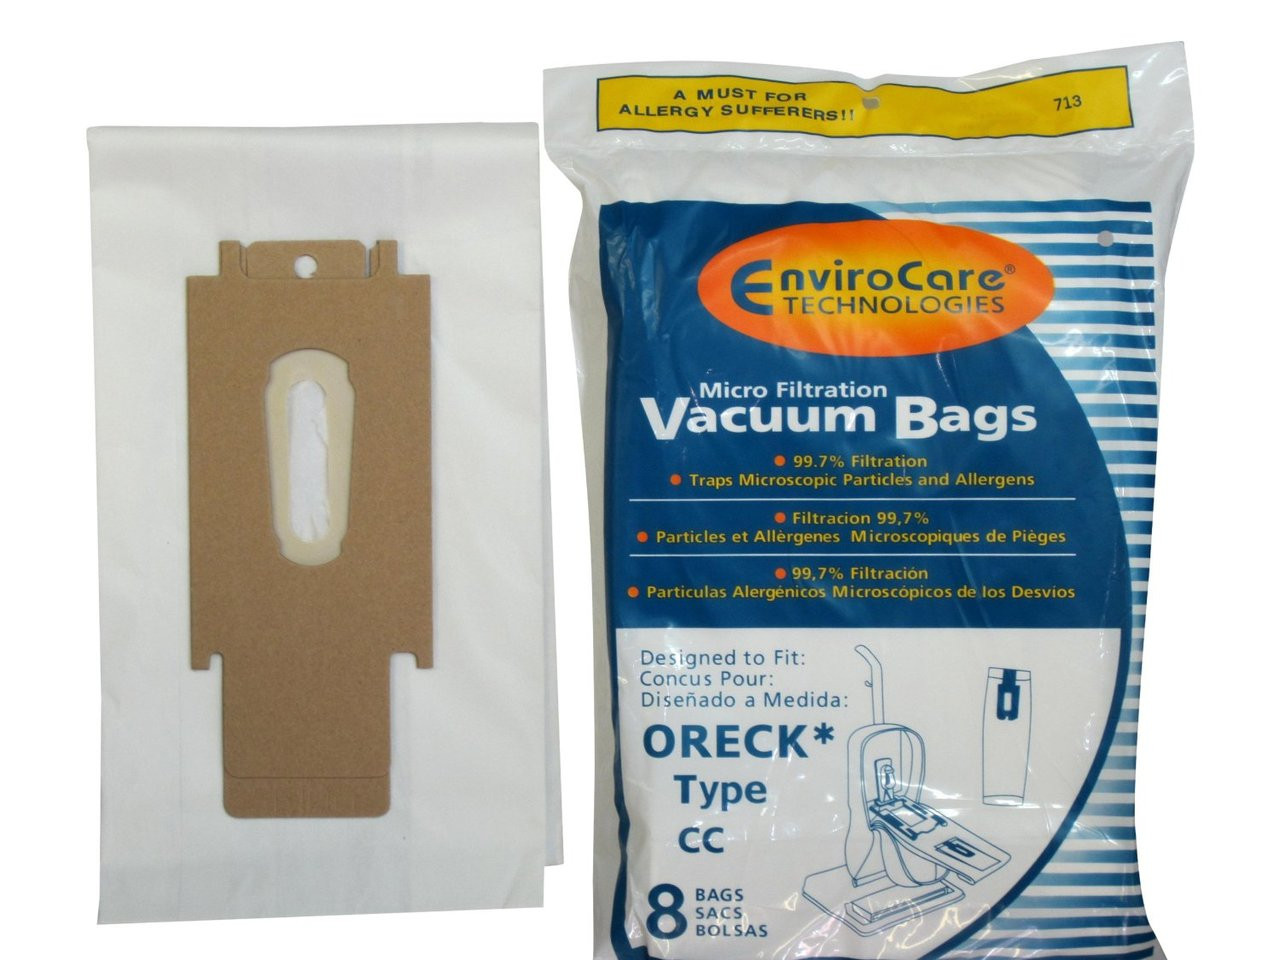 MicroType Filtration Vacuum Bags Replacement for Oreck XL XL Classic Type  Cc Upright Vacuums Cleaner Part Dust Bag Ak1cc6a  China Vacuum Cleaner  Dust Bag Oreck Ak1cc6a Bag  MadeinChinacom